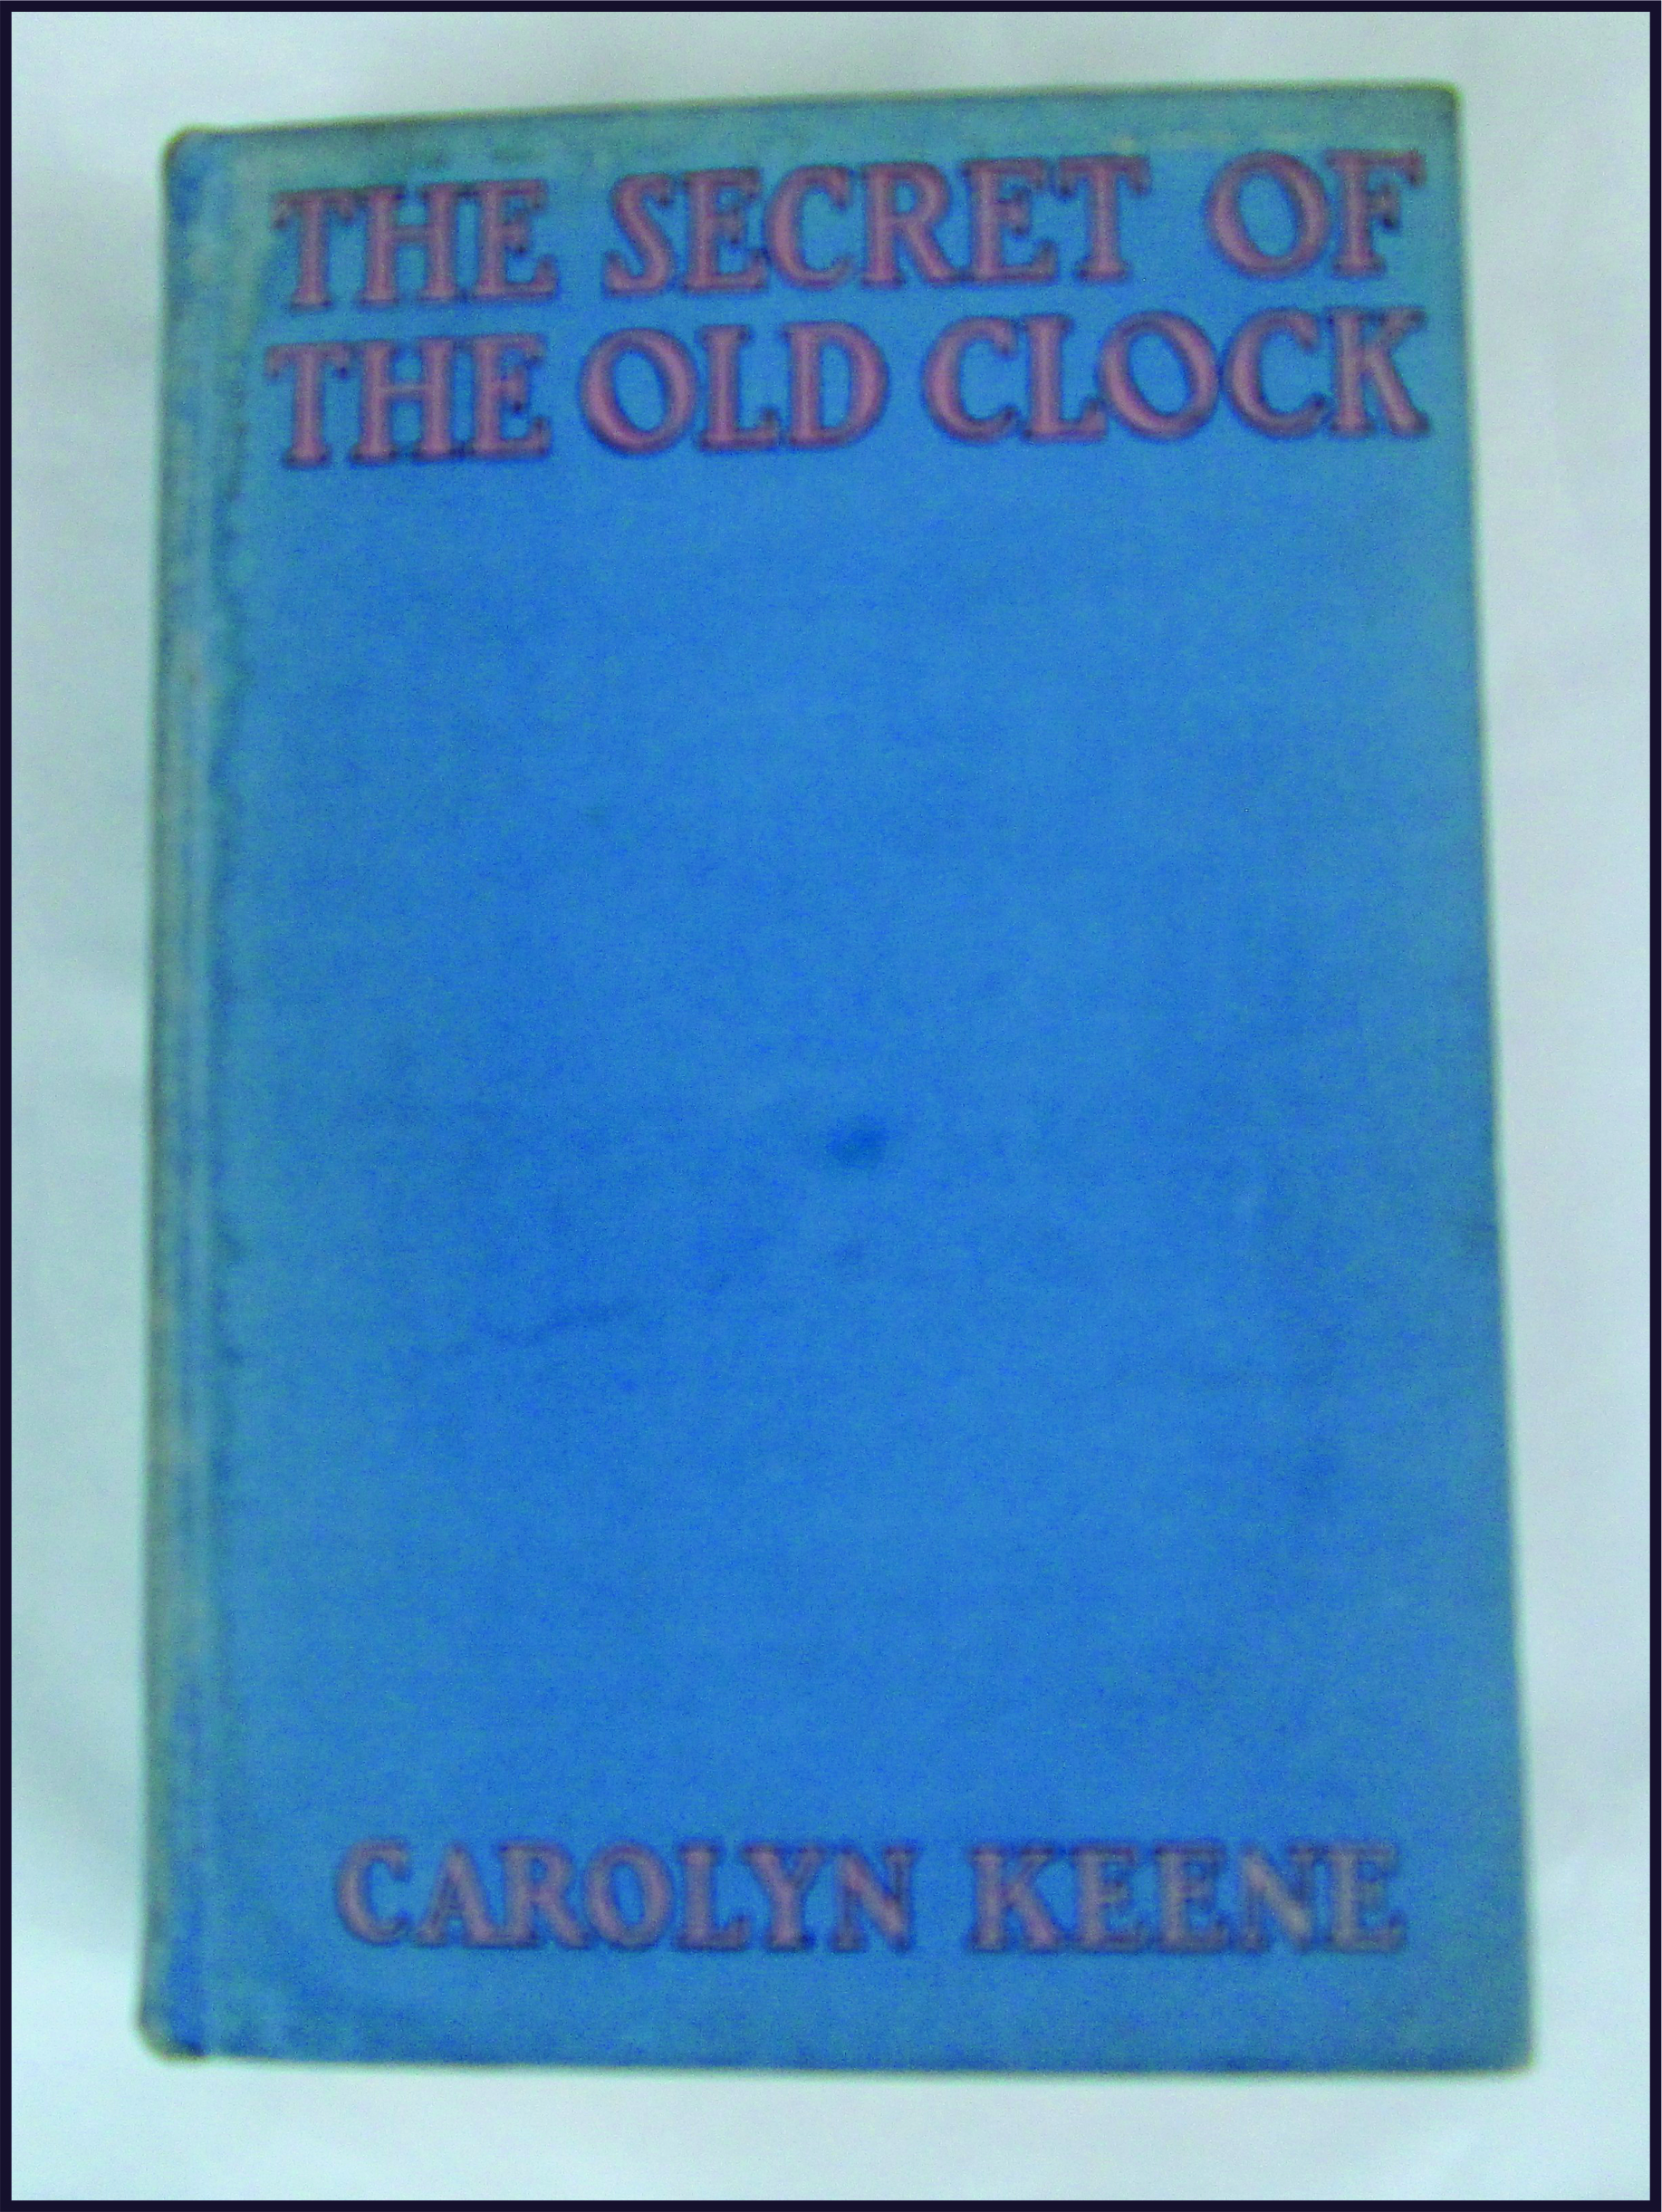 the secret of the old clock by carolyn keene